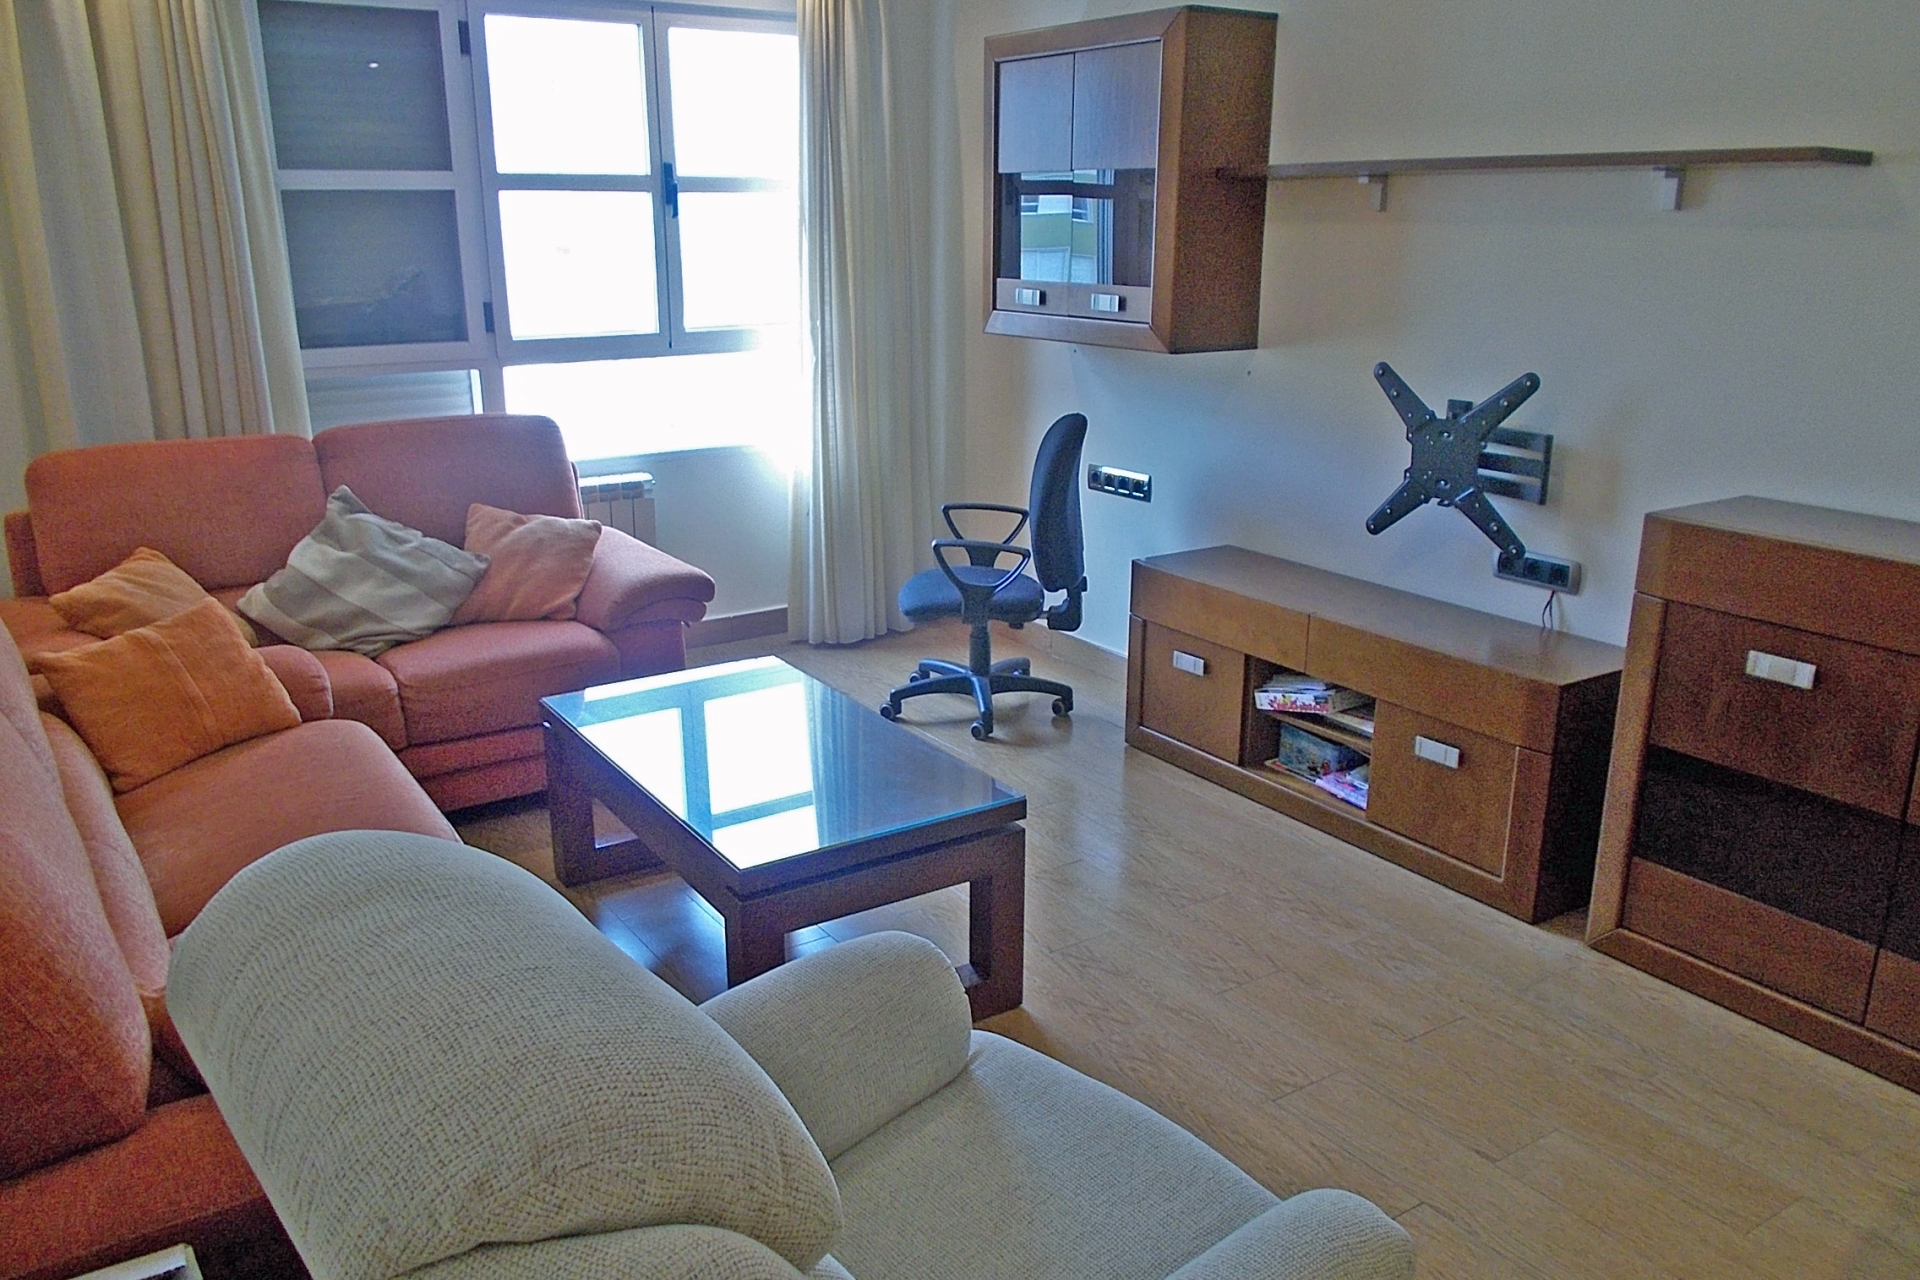 Property Sold - Apartment for sale - Yecla